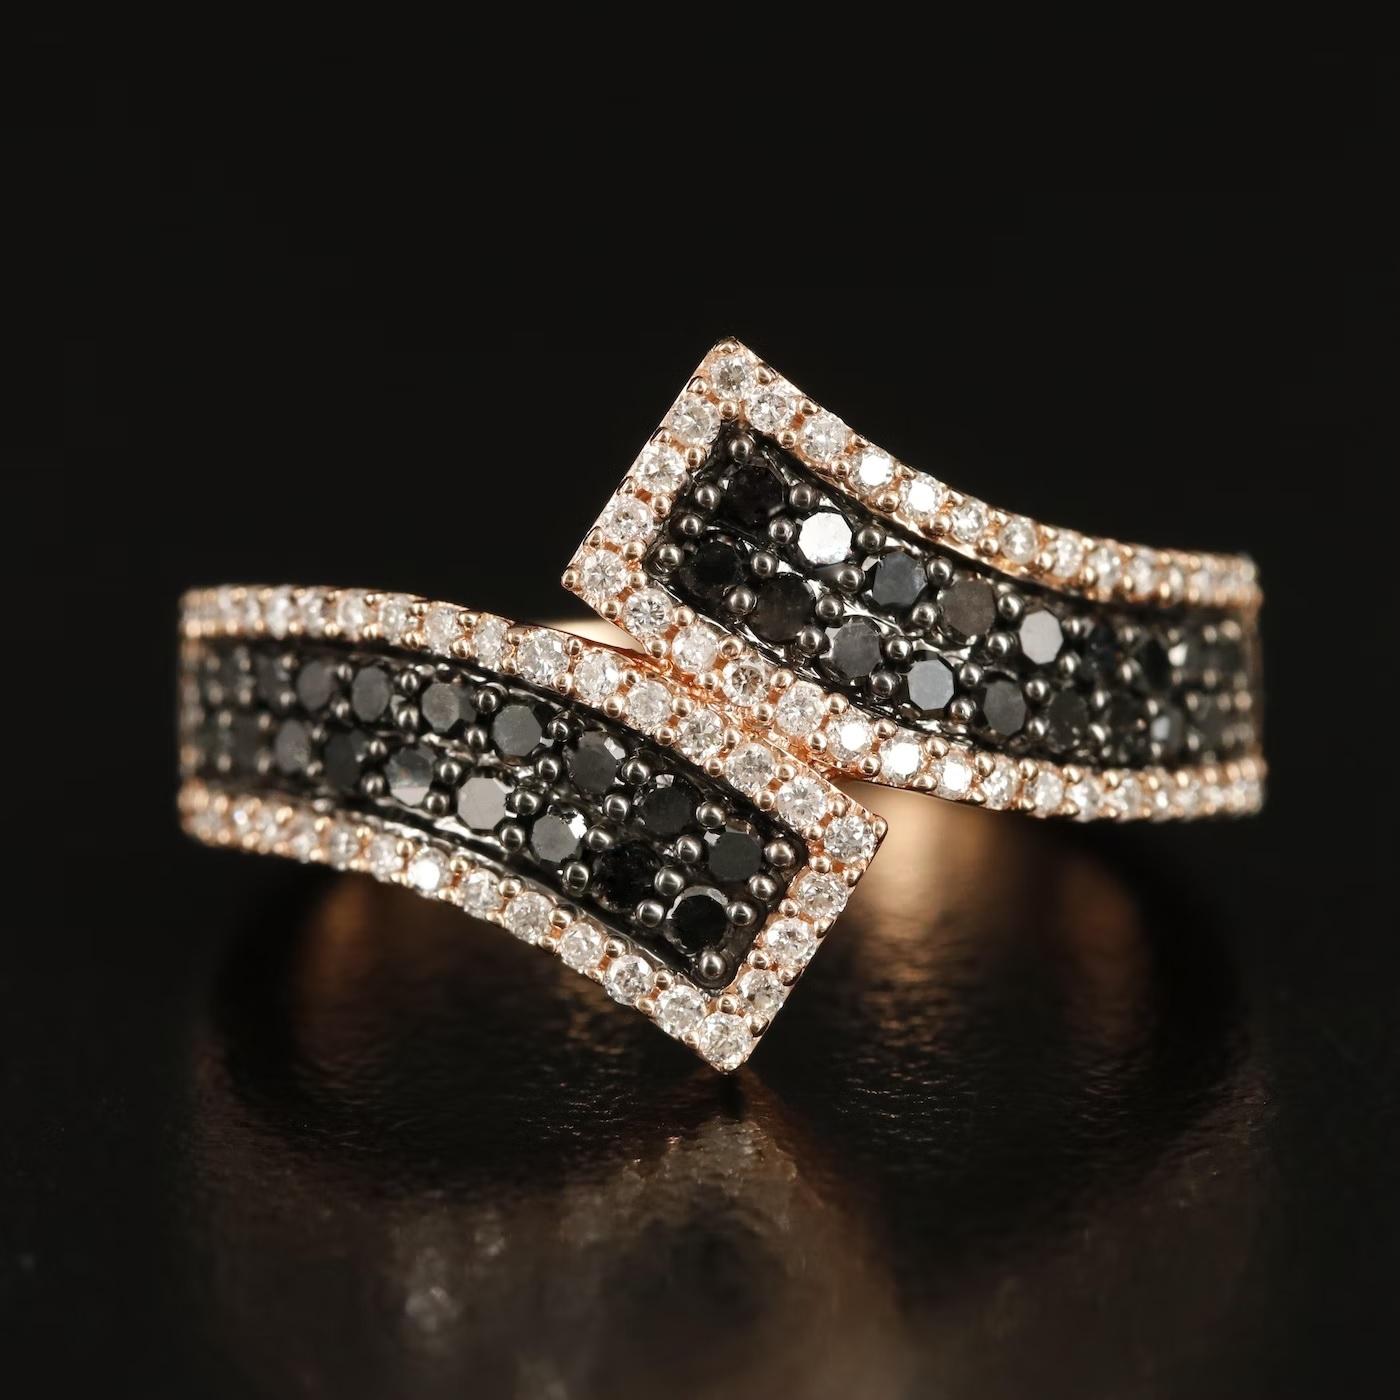 Karen Marchesa Designer ring - stamped KRN / 14K

NEW WITH TAGS, Tag Price $4450

1.05 CWT diamond (G / SI) white and Black Diamond, all natural

14K gold, stamped 14K

Head turner, statement piece. 

The ring is size 7.25 US size and can be